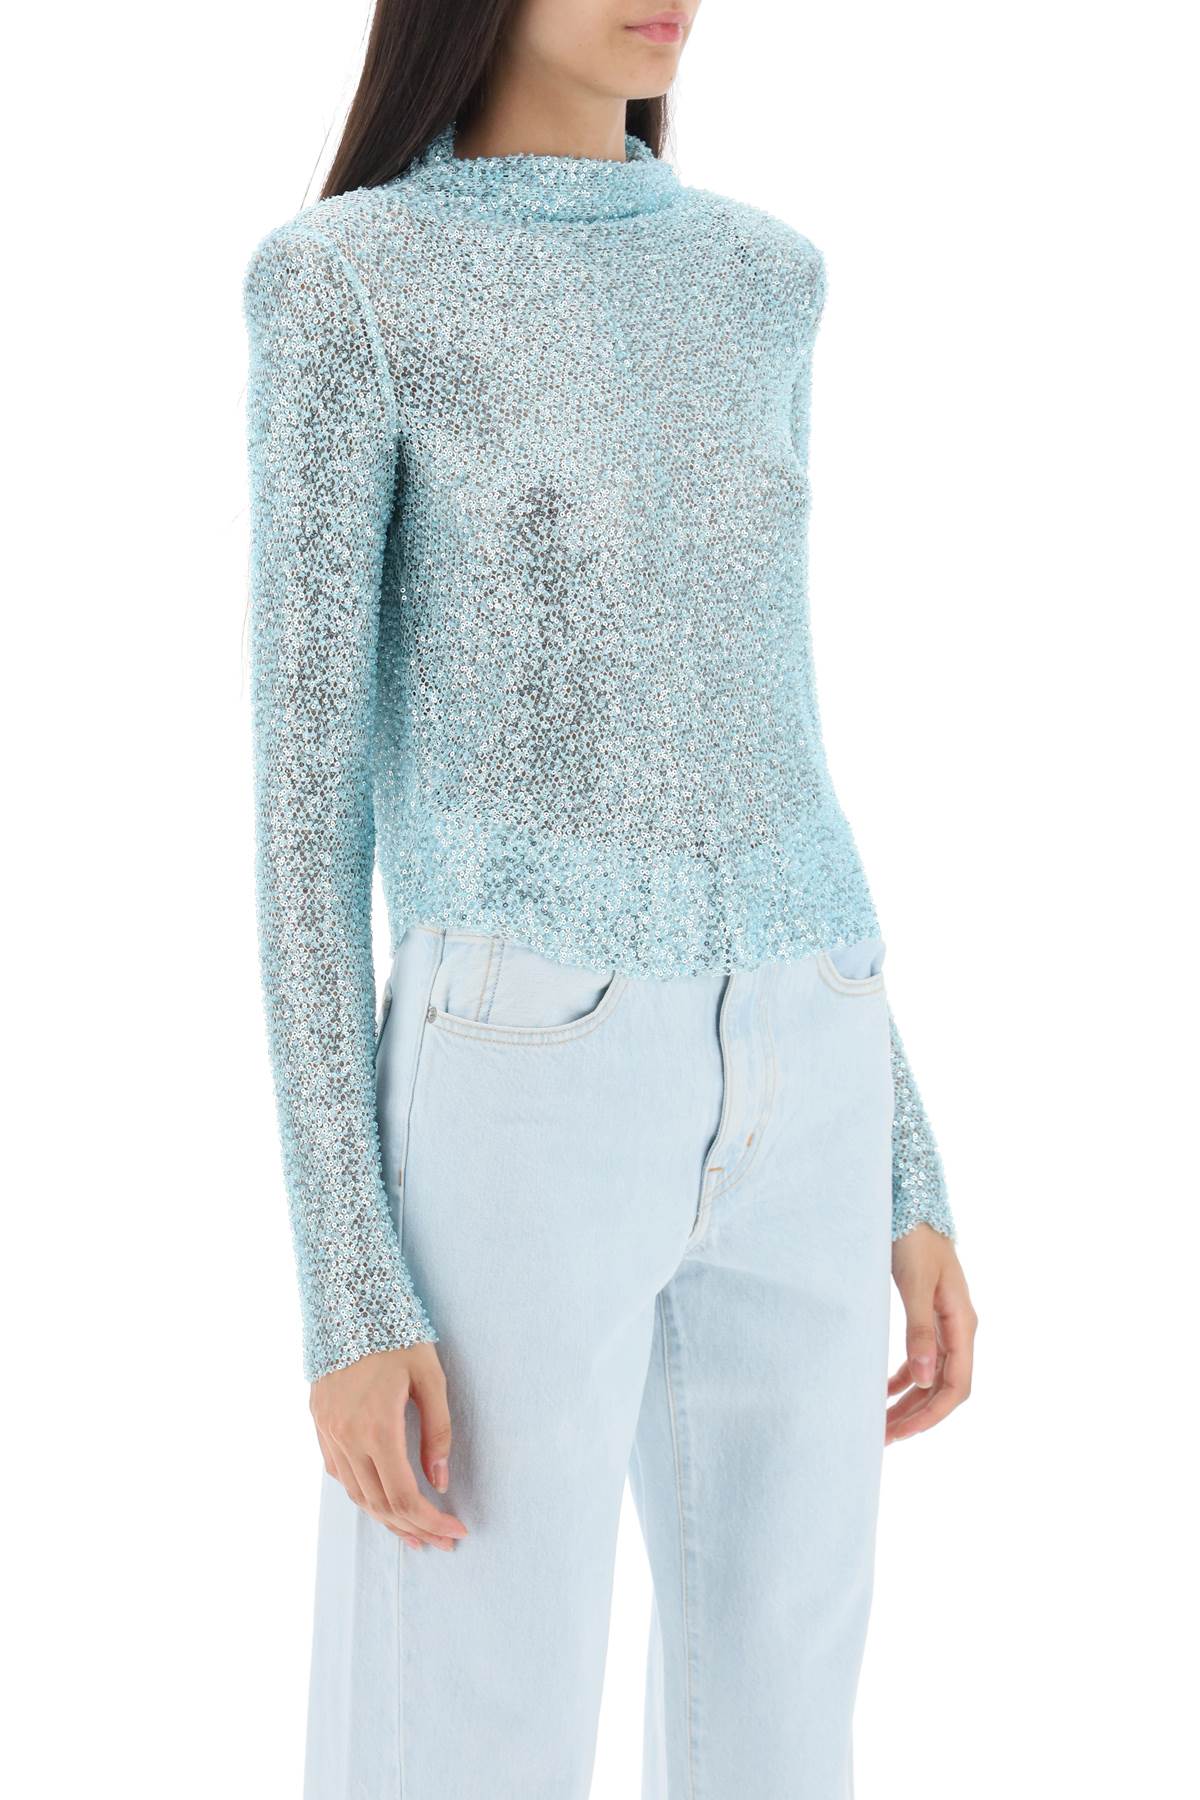 Self portrait long-sleeved top with sequins and beads-1